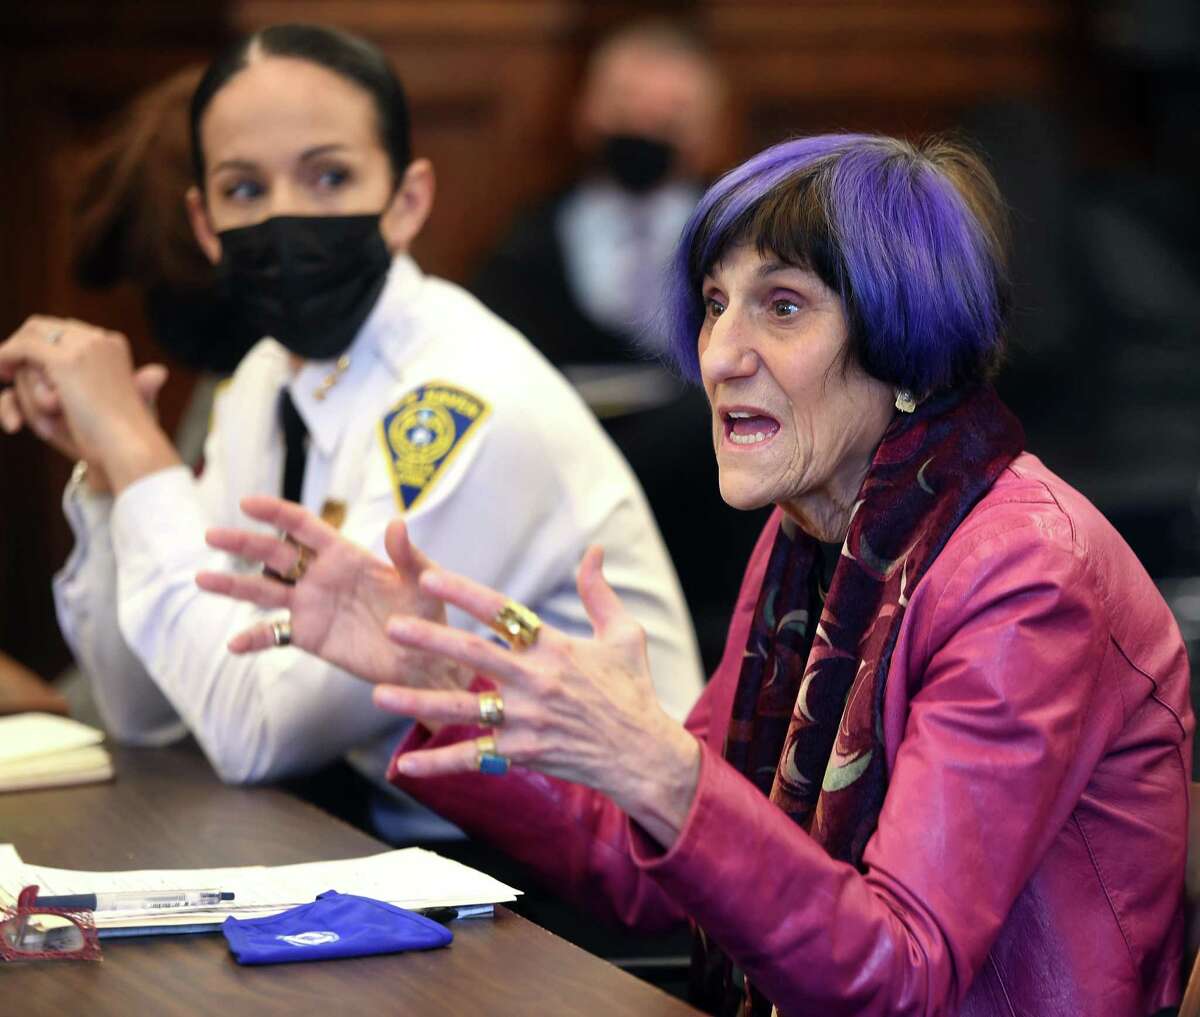 U.S. Rep. Rosa DeLauro speaks at a roundtable discussion at the Hall of Records in New Haven March 28, 2022, concerning New Haven’s community crisis response team, Elm City COMPASS, Compassionate Allies Serving Our Streets.